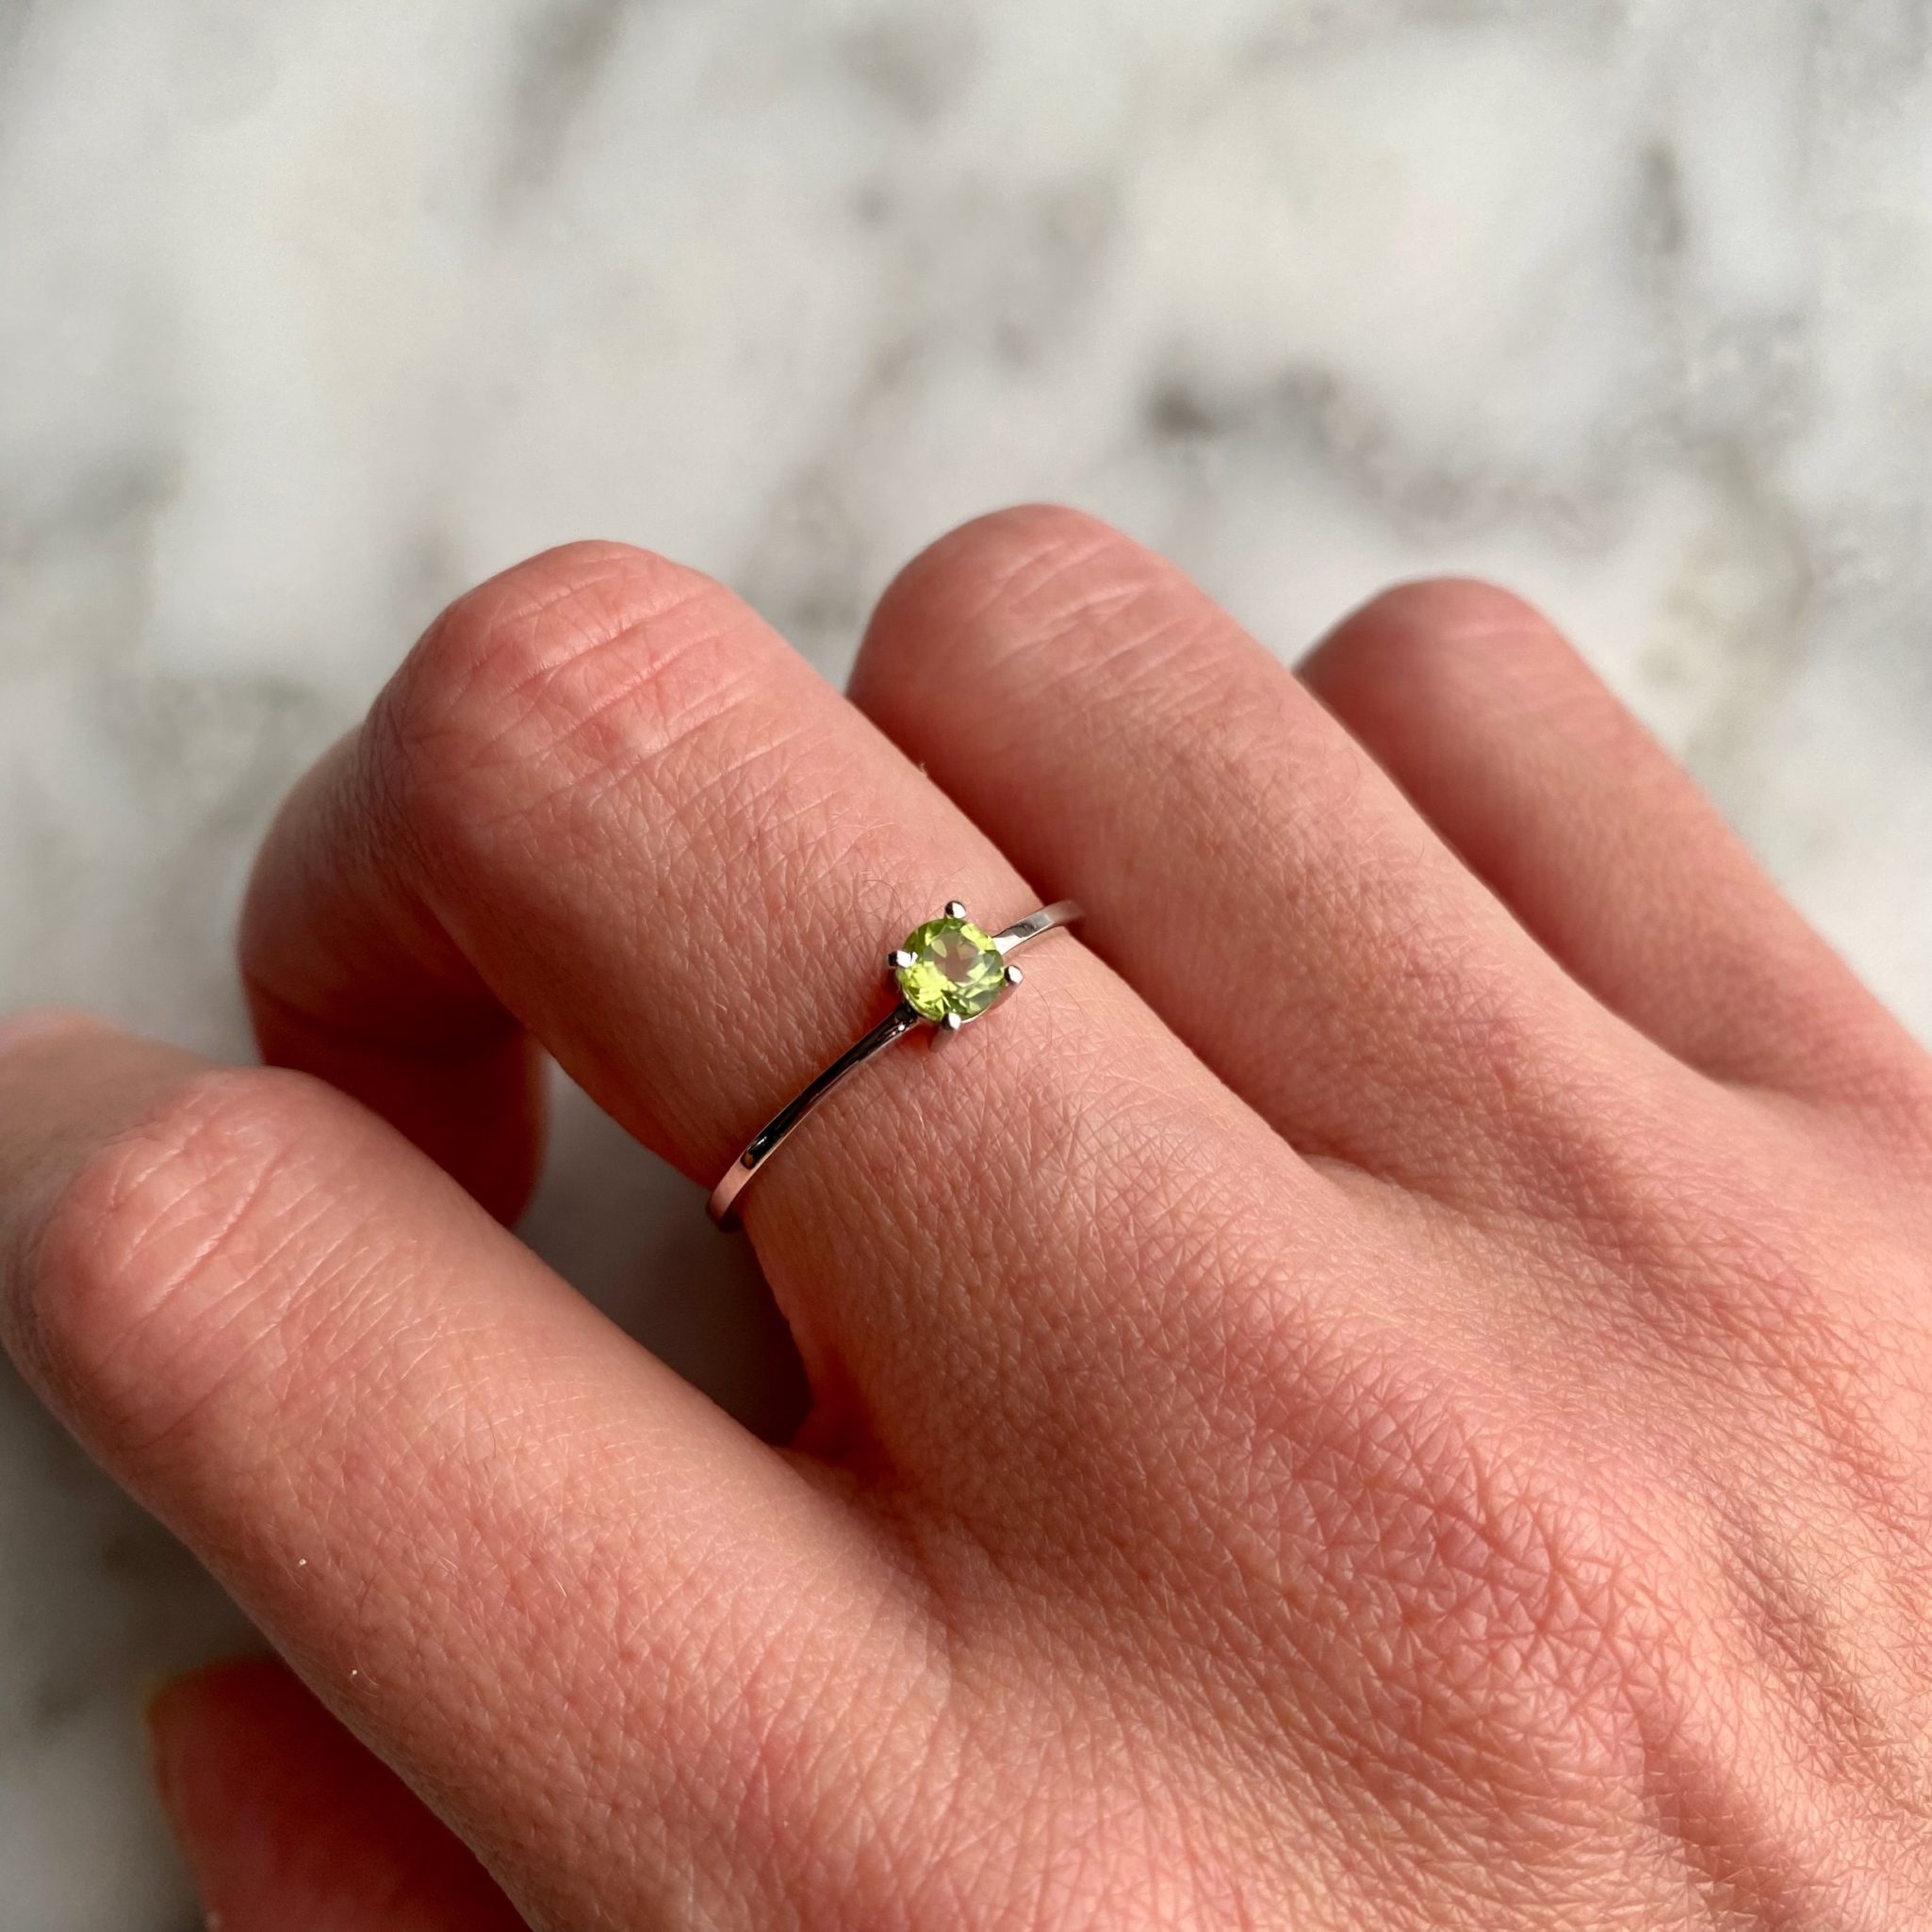 Peridot sterling silver ring - bague peridot argent sterling